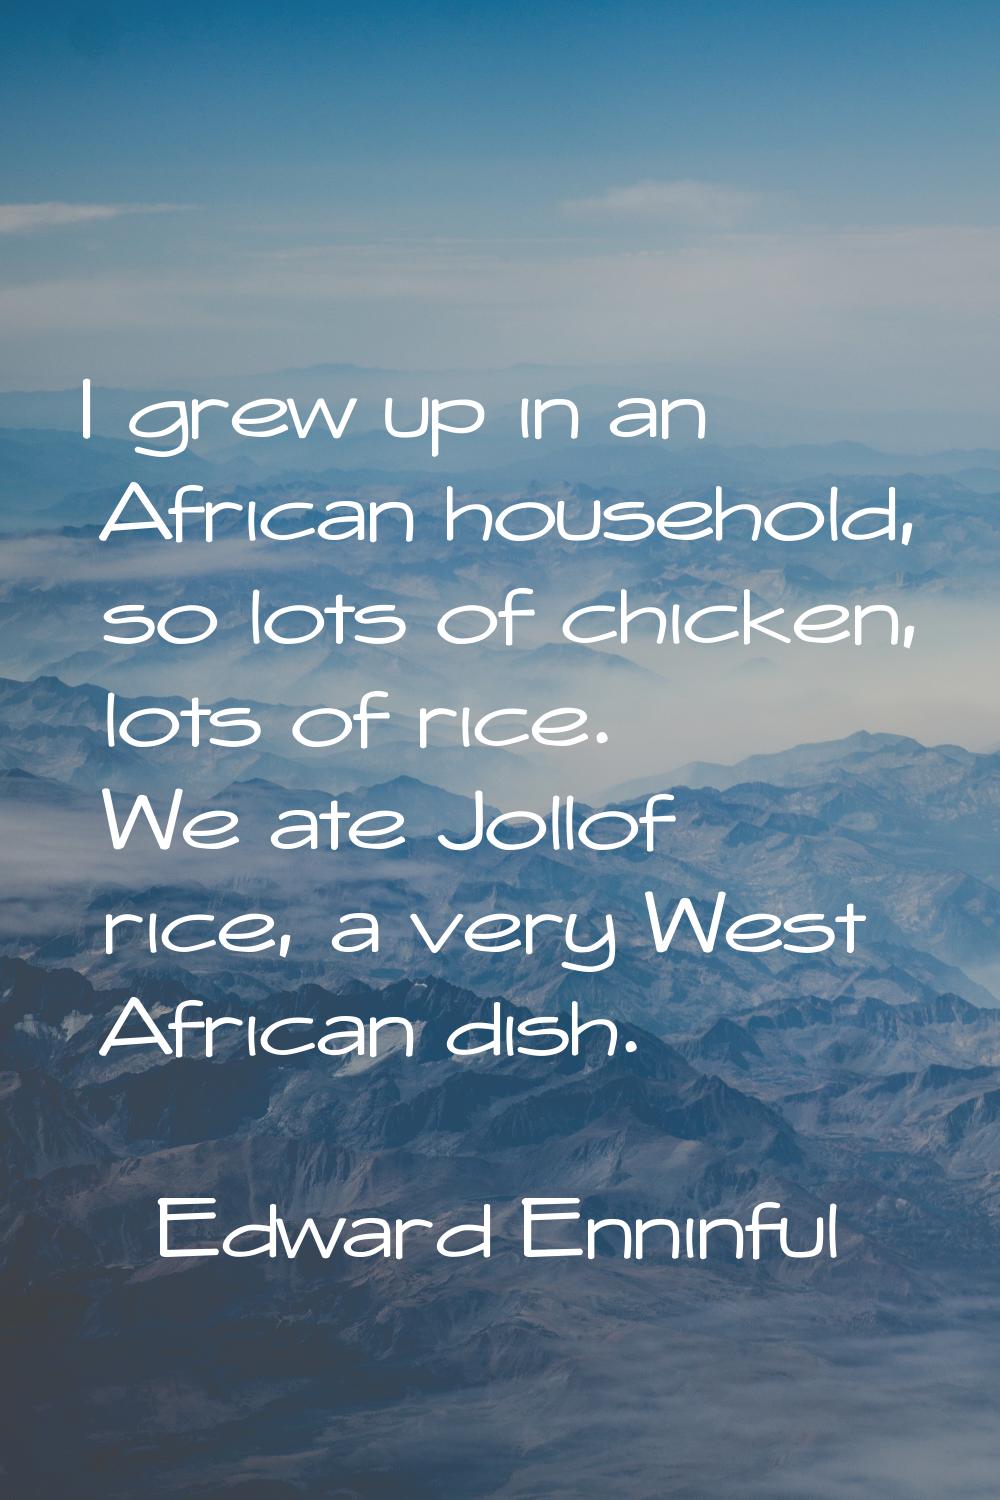 I grew up in an African household, so lots of chicken, lots of rice. We ate Jollof rice, a very Wes